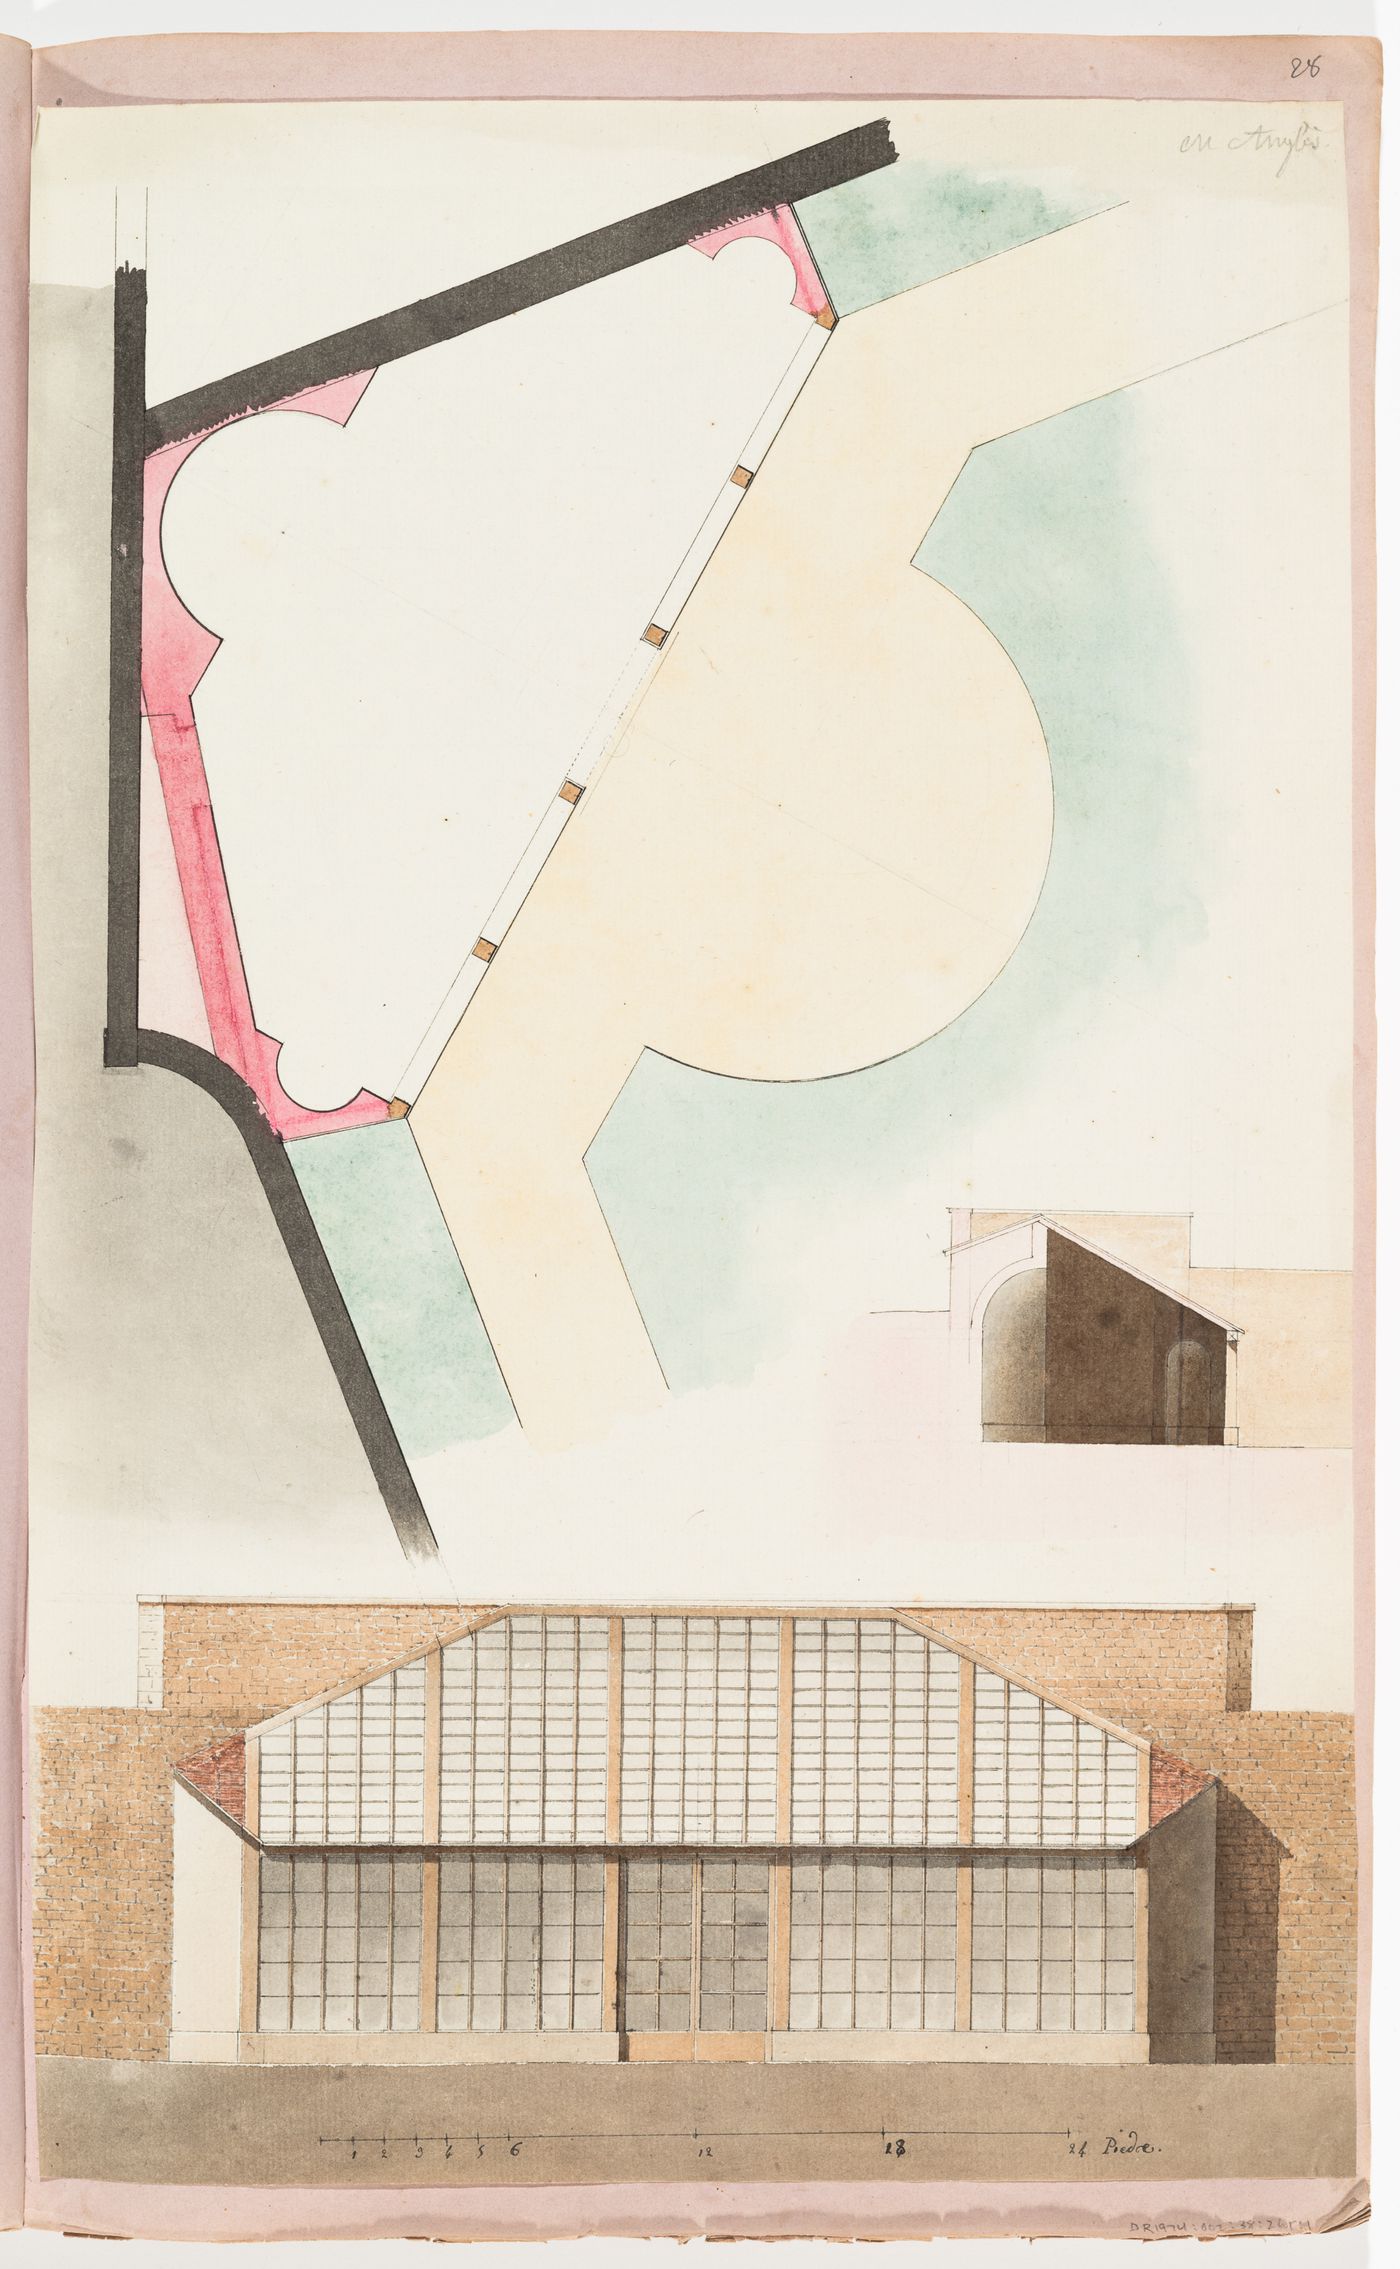 Plan, section and elevation for a greenhouse for comte Anglès; verso: Sketch plans and elevations for five Chinese-inspired garden pavilions